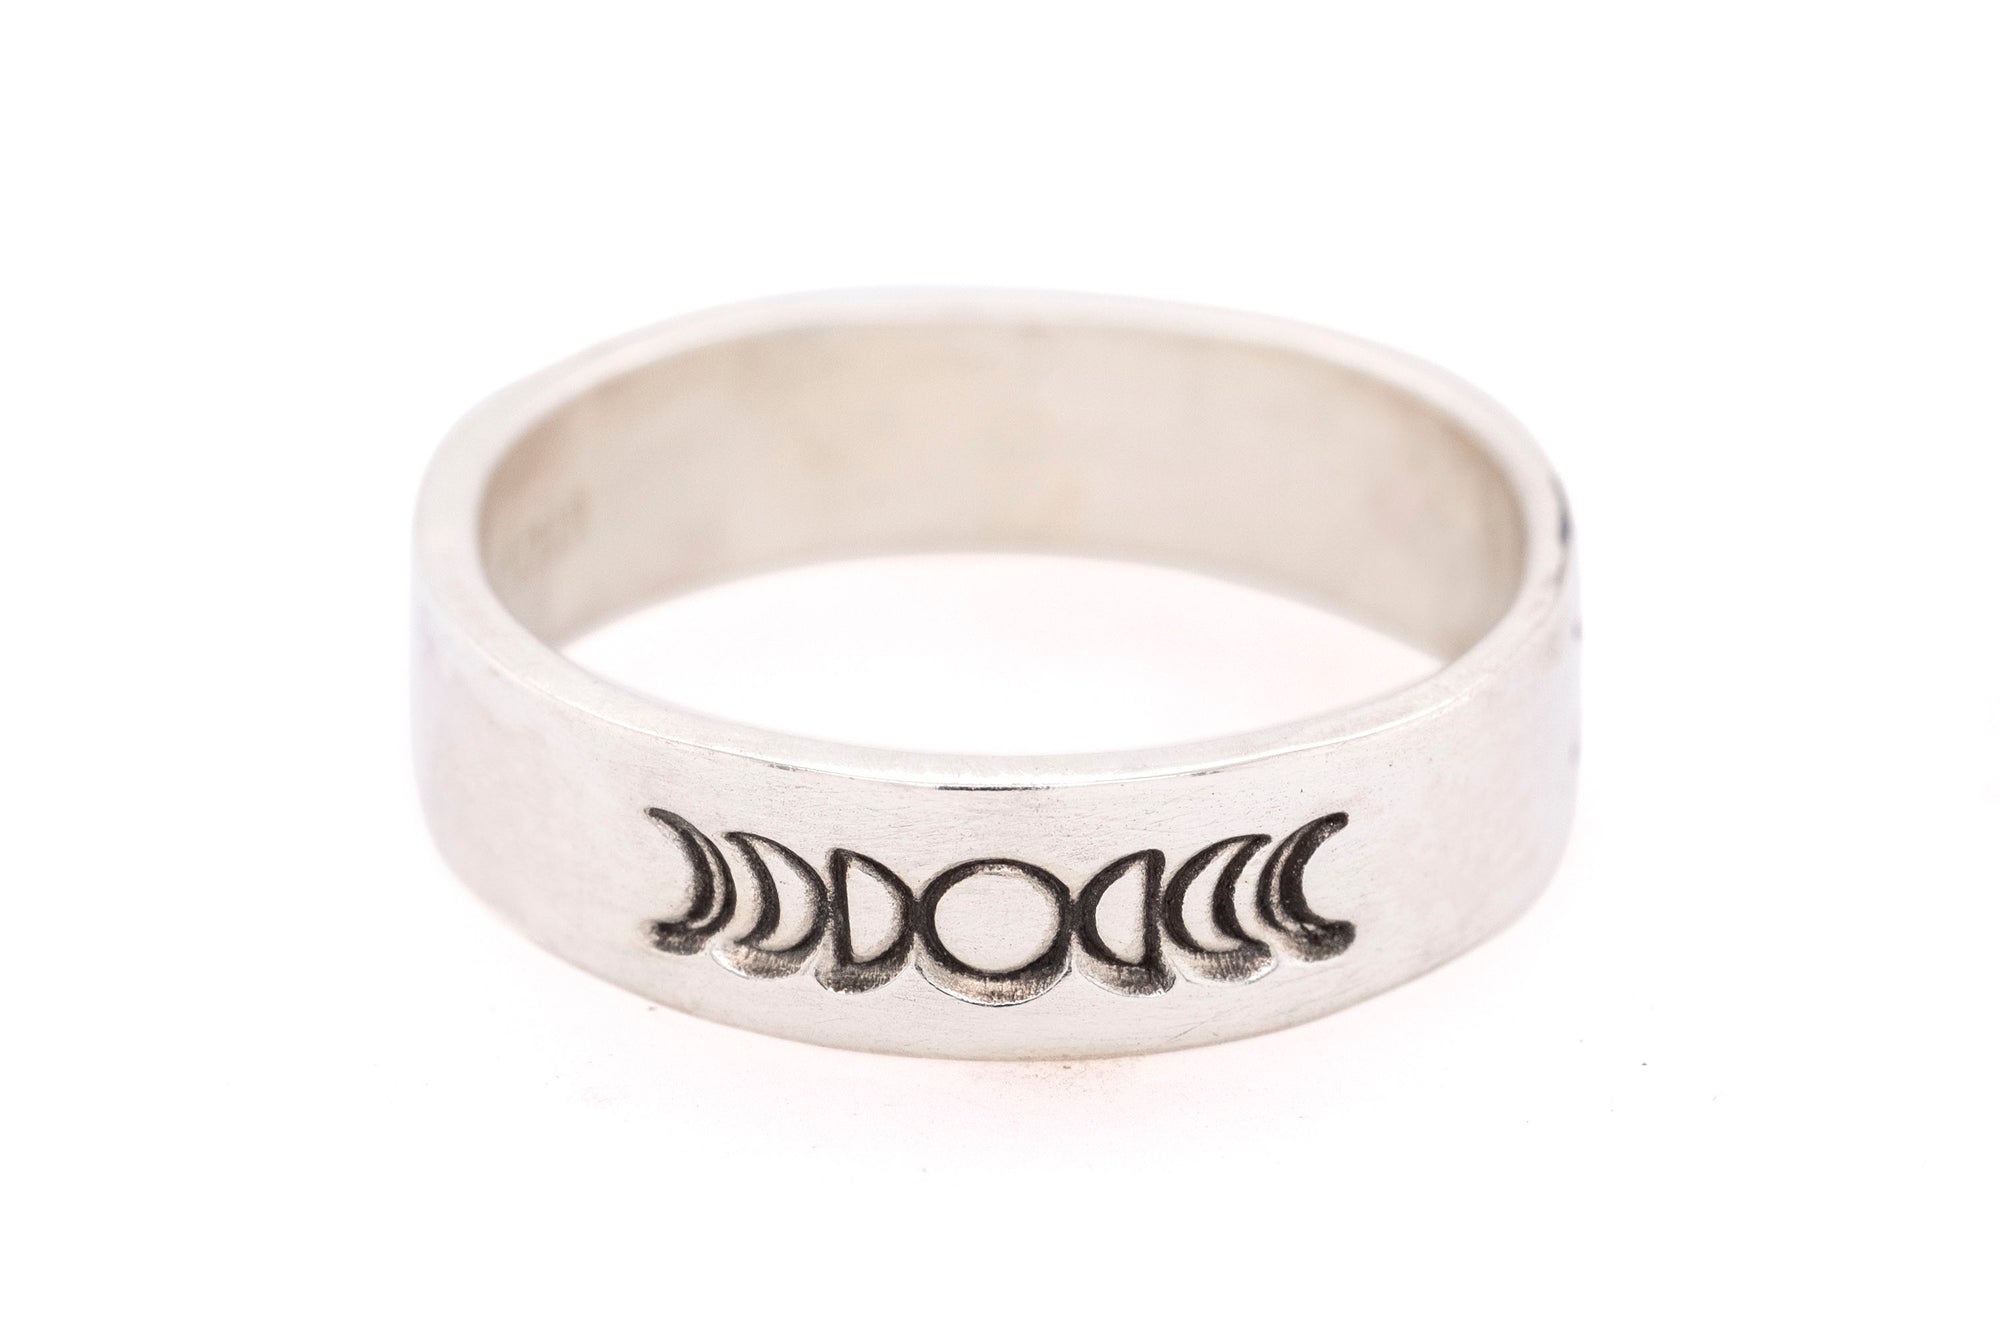 Handmade Silver Moon Phases Ring - Front